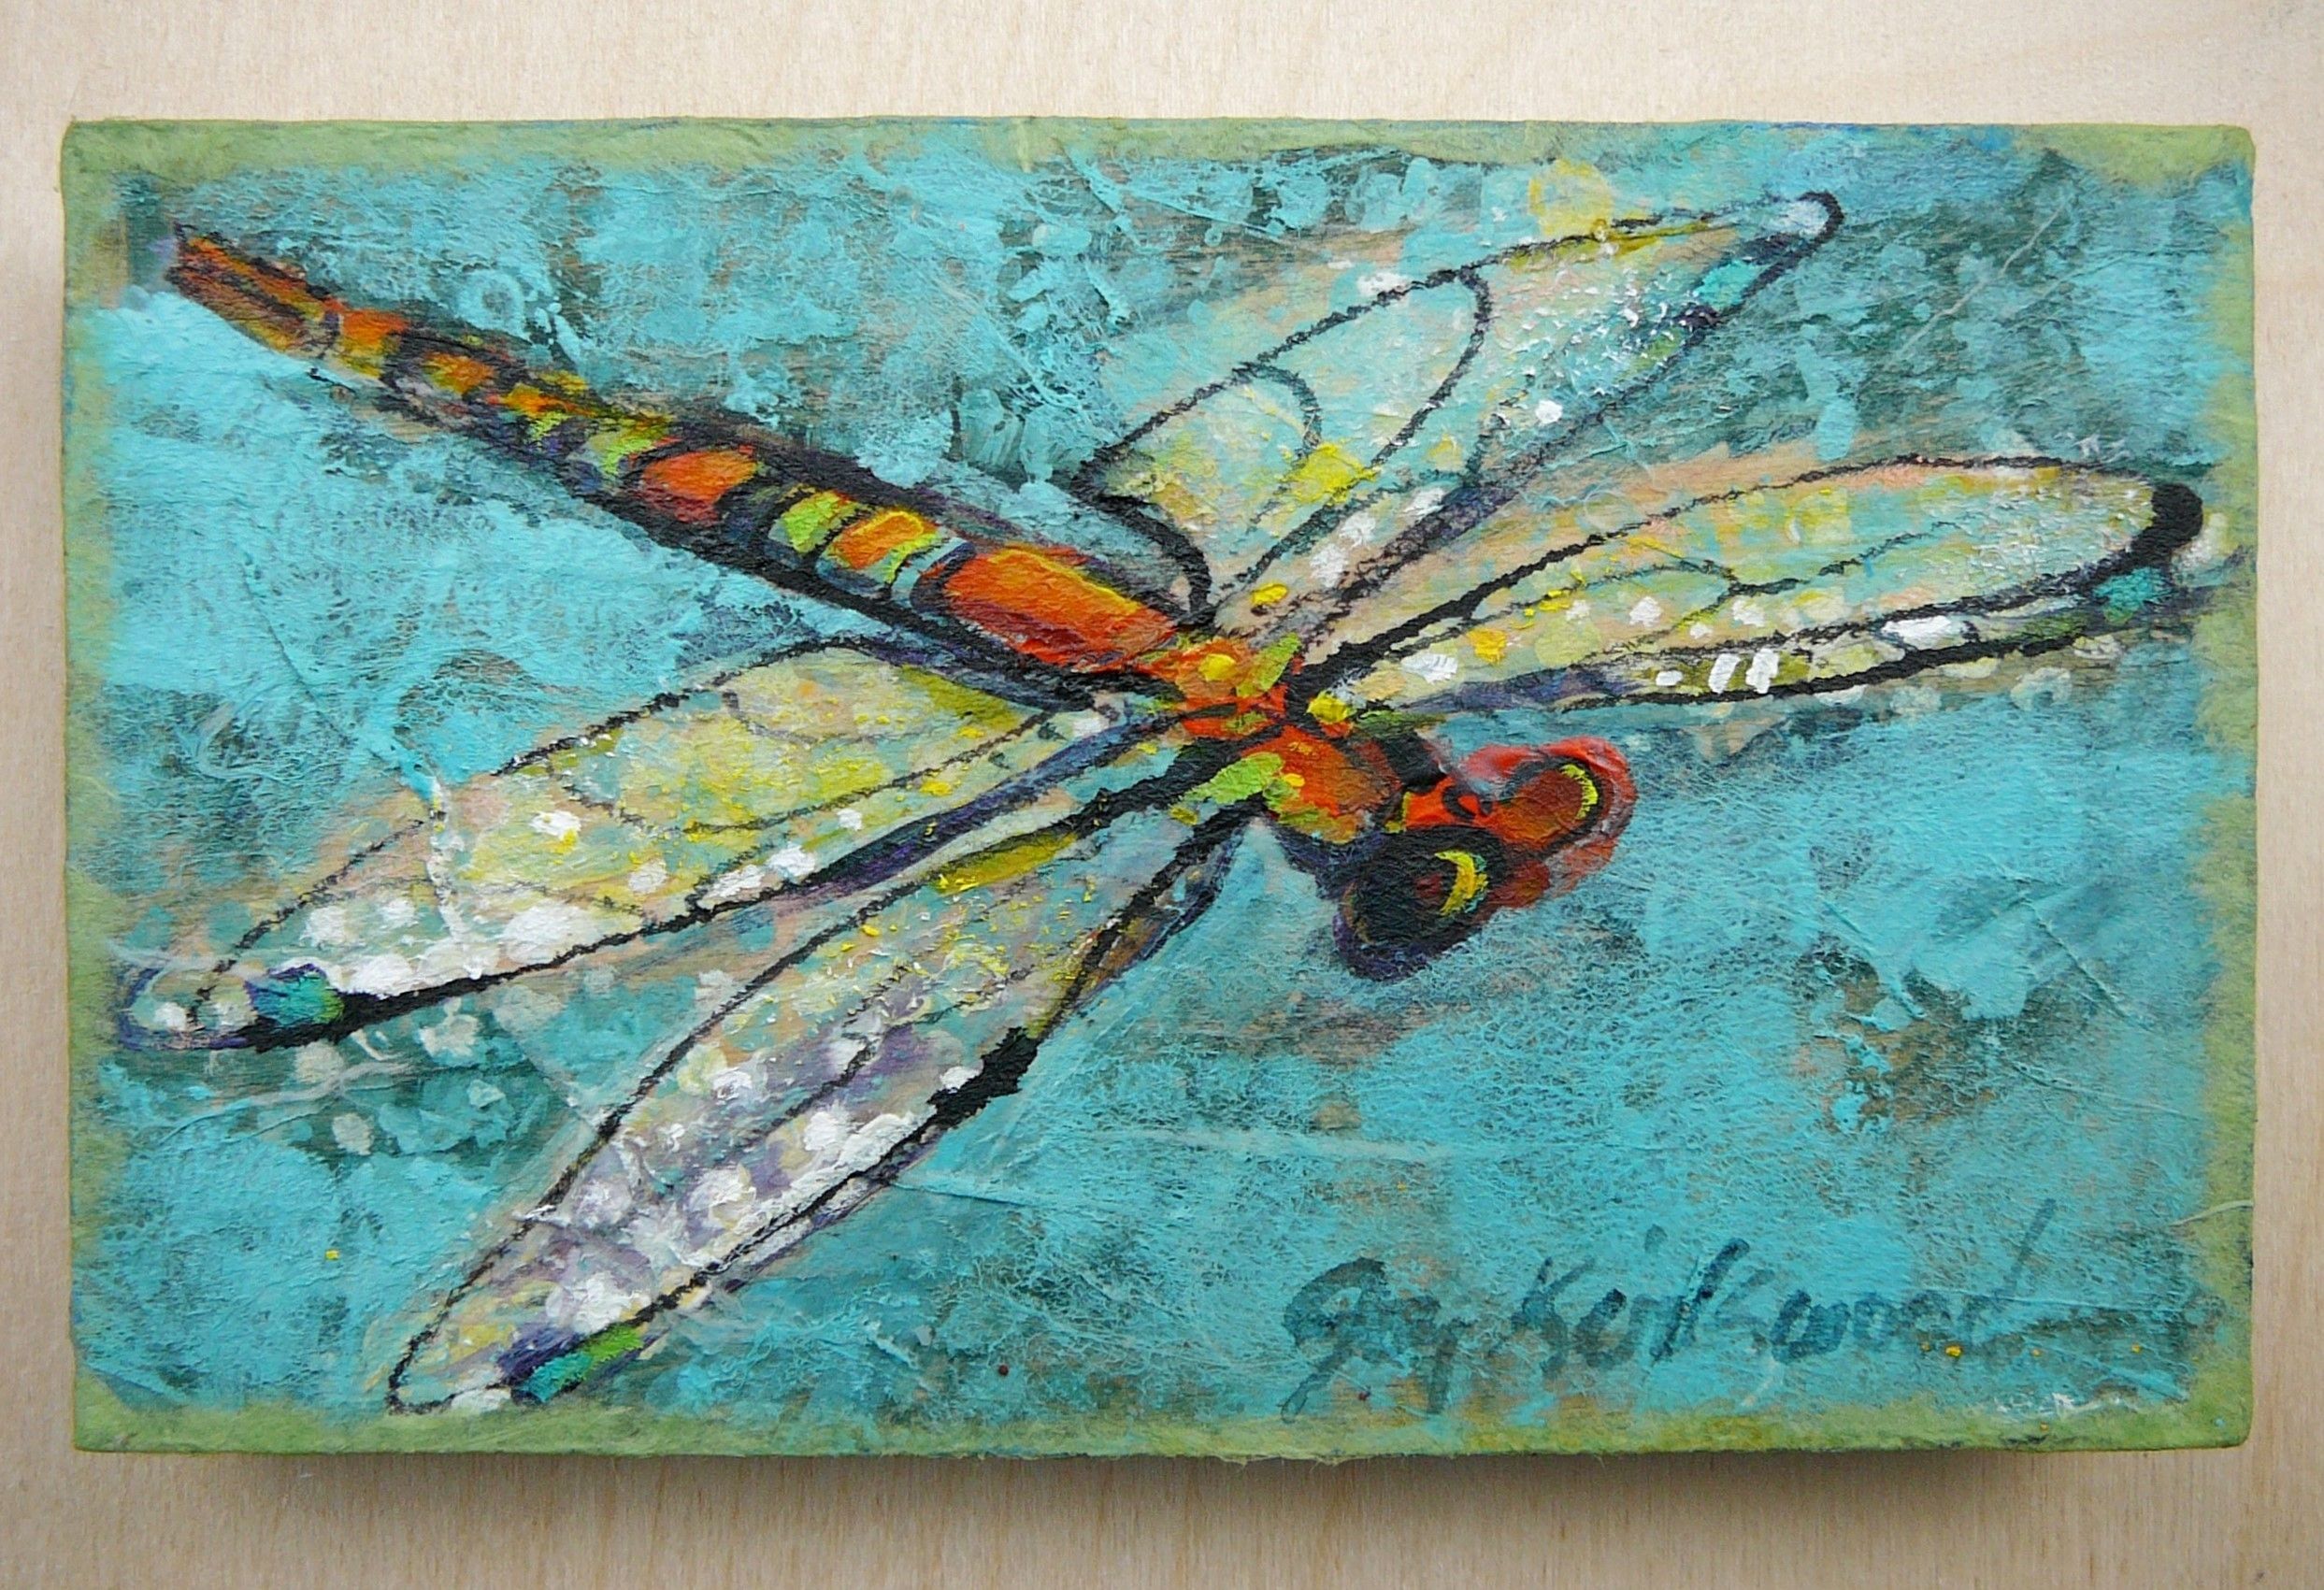 Dragonflies | Artjoy A (View 17 of 20)